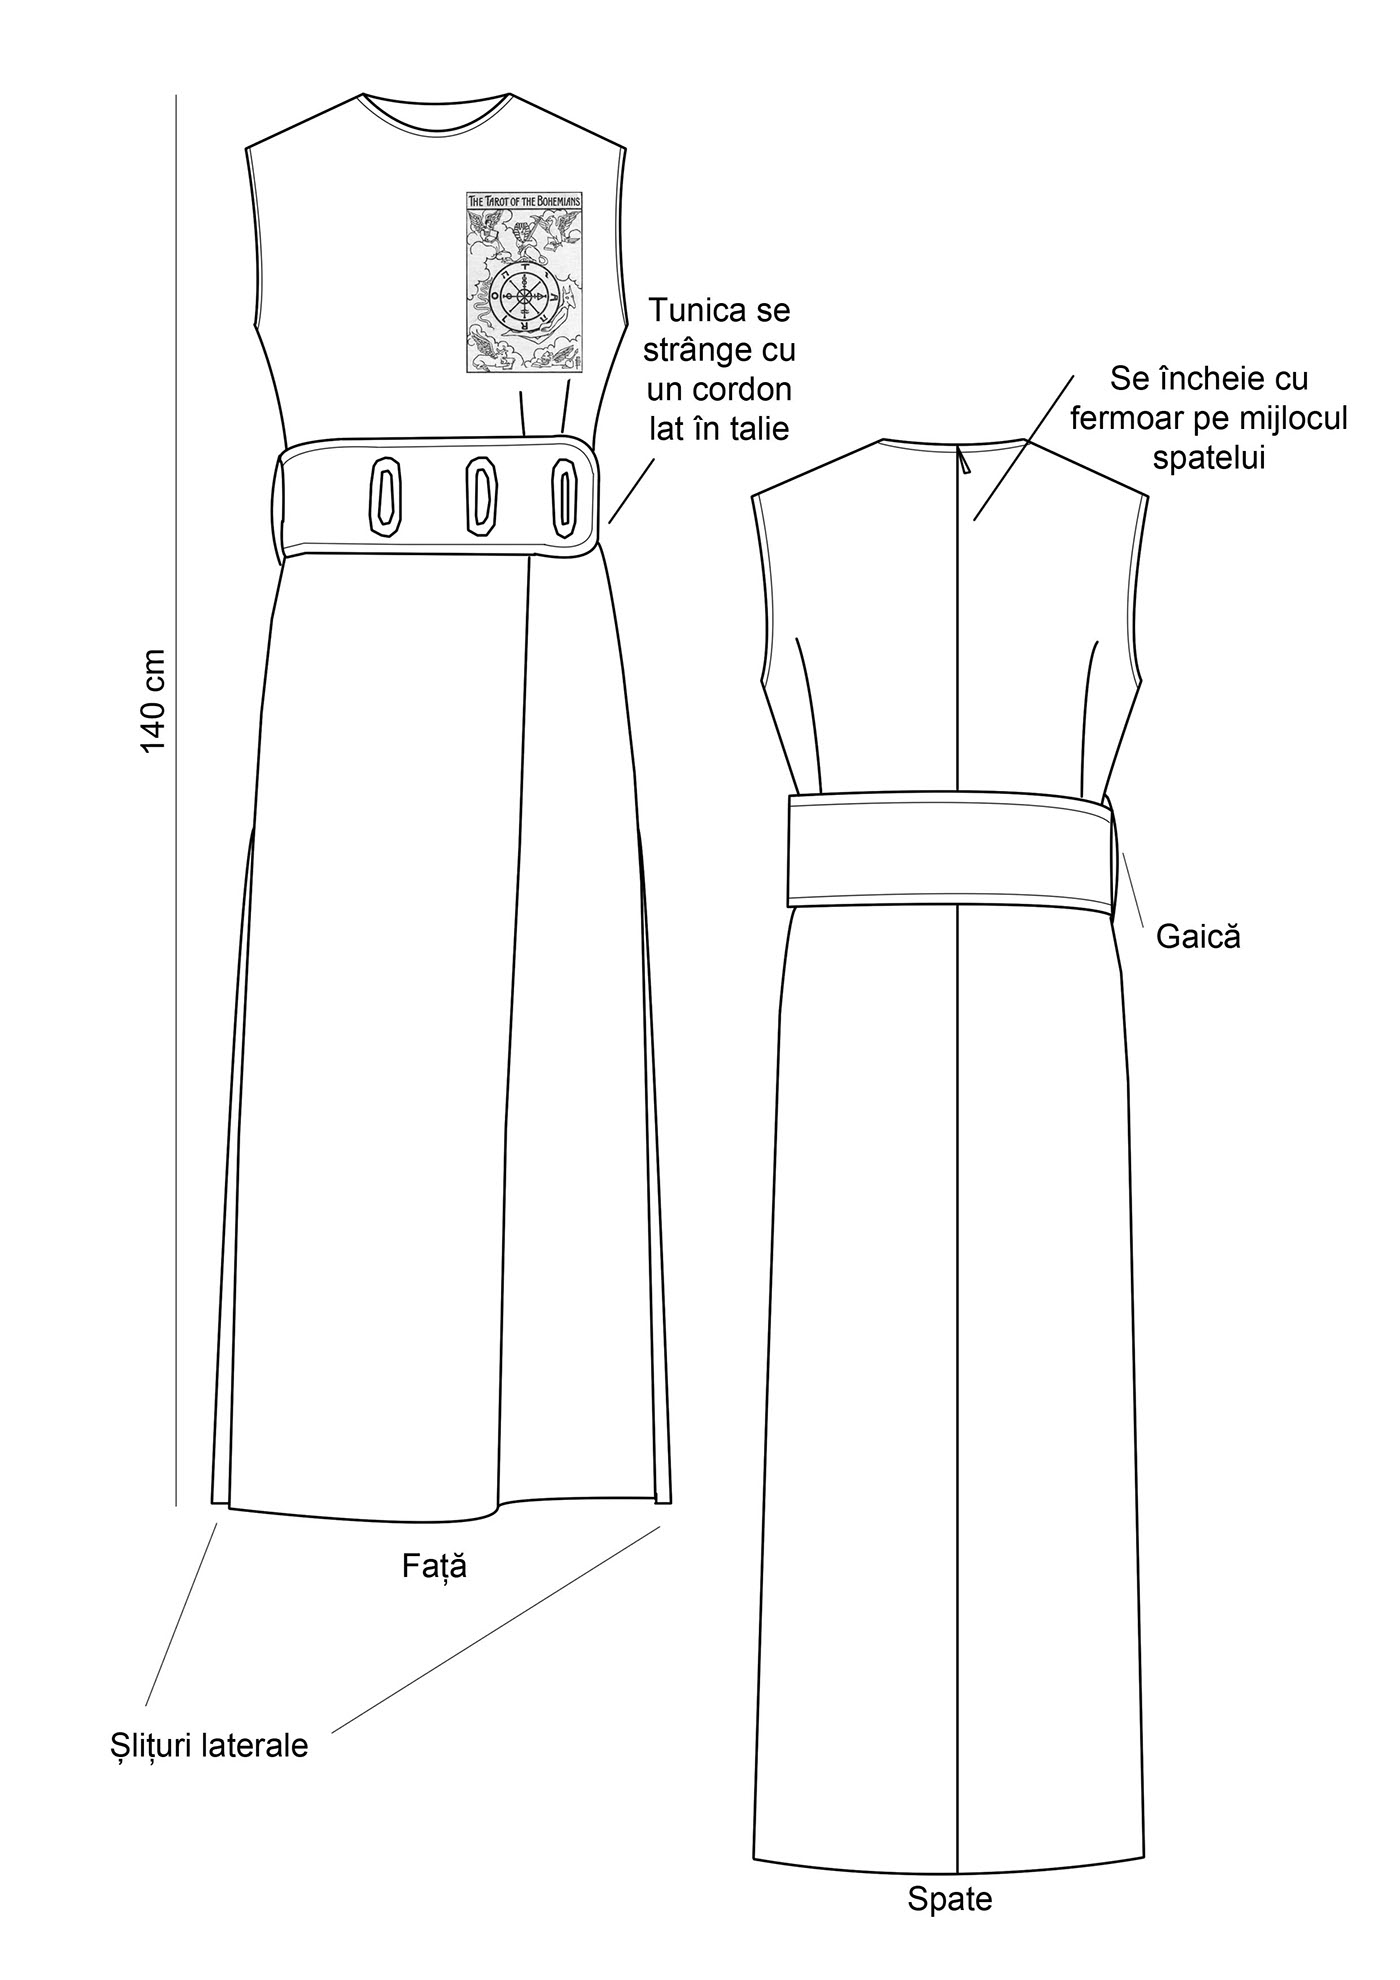 women's fashion Collection sketch Technical Drawings occult dark arts conceptual